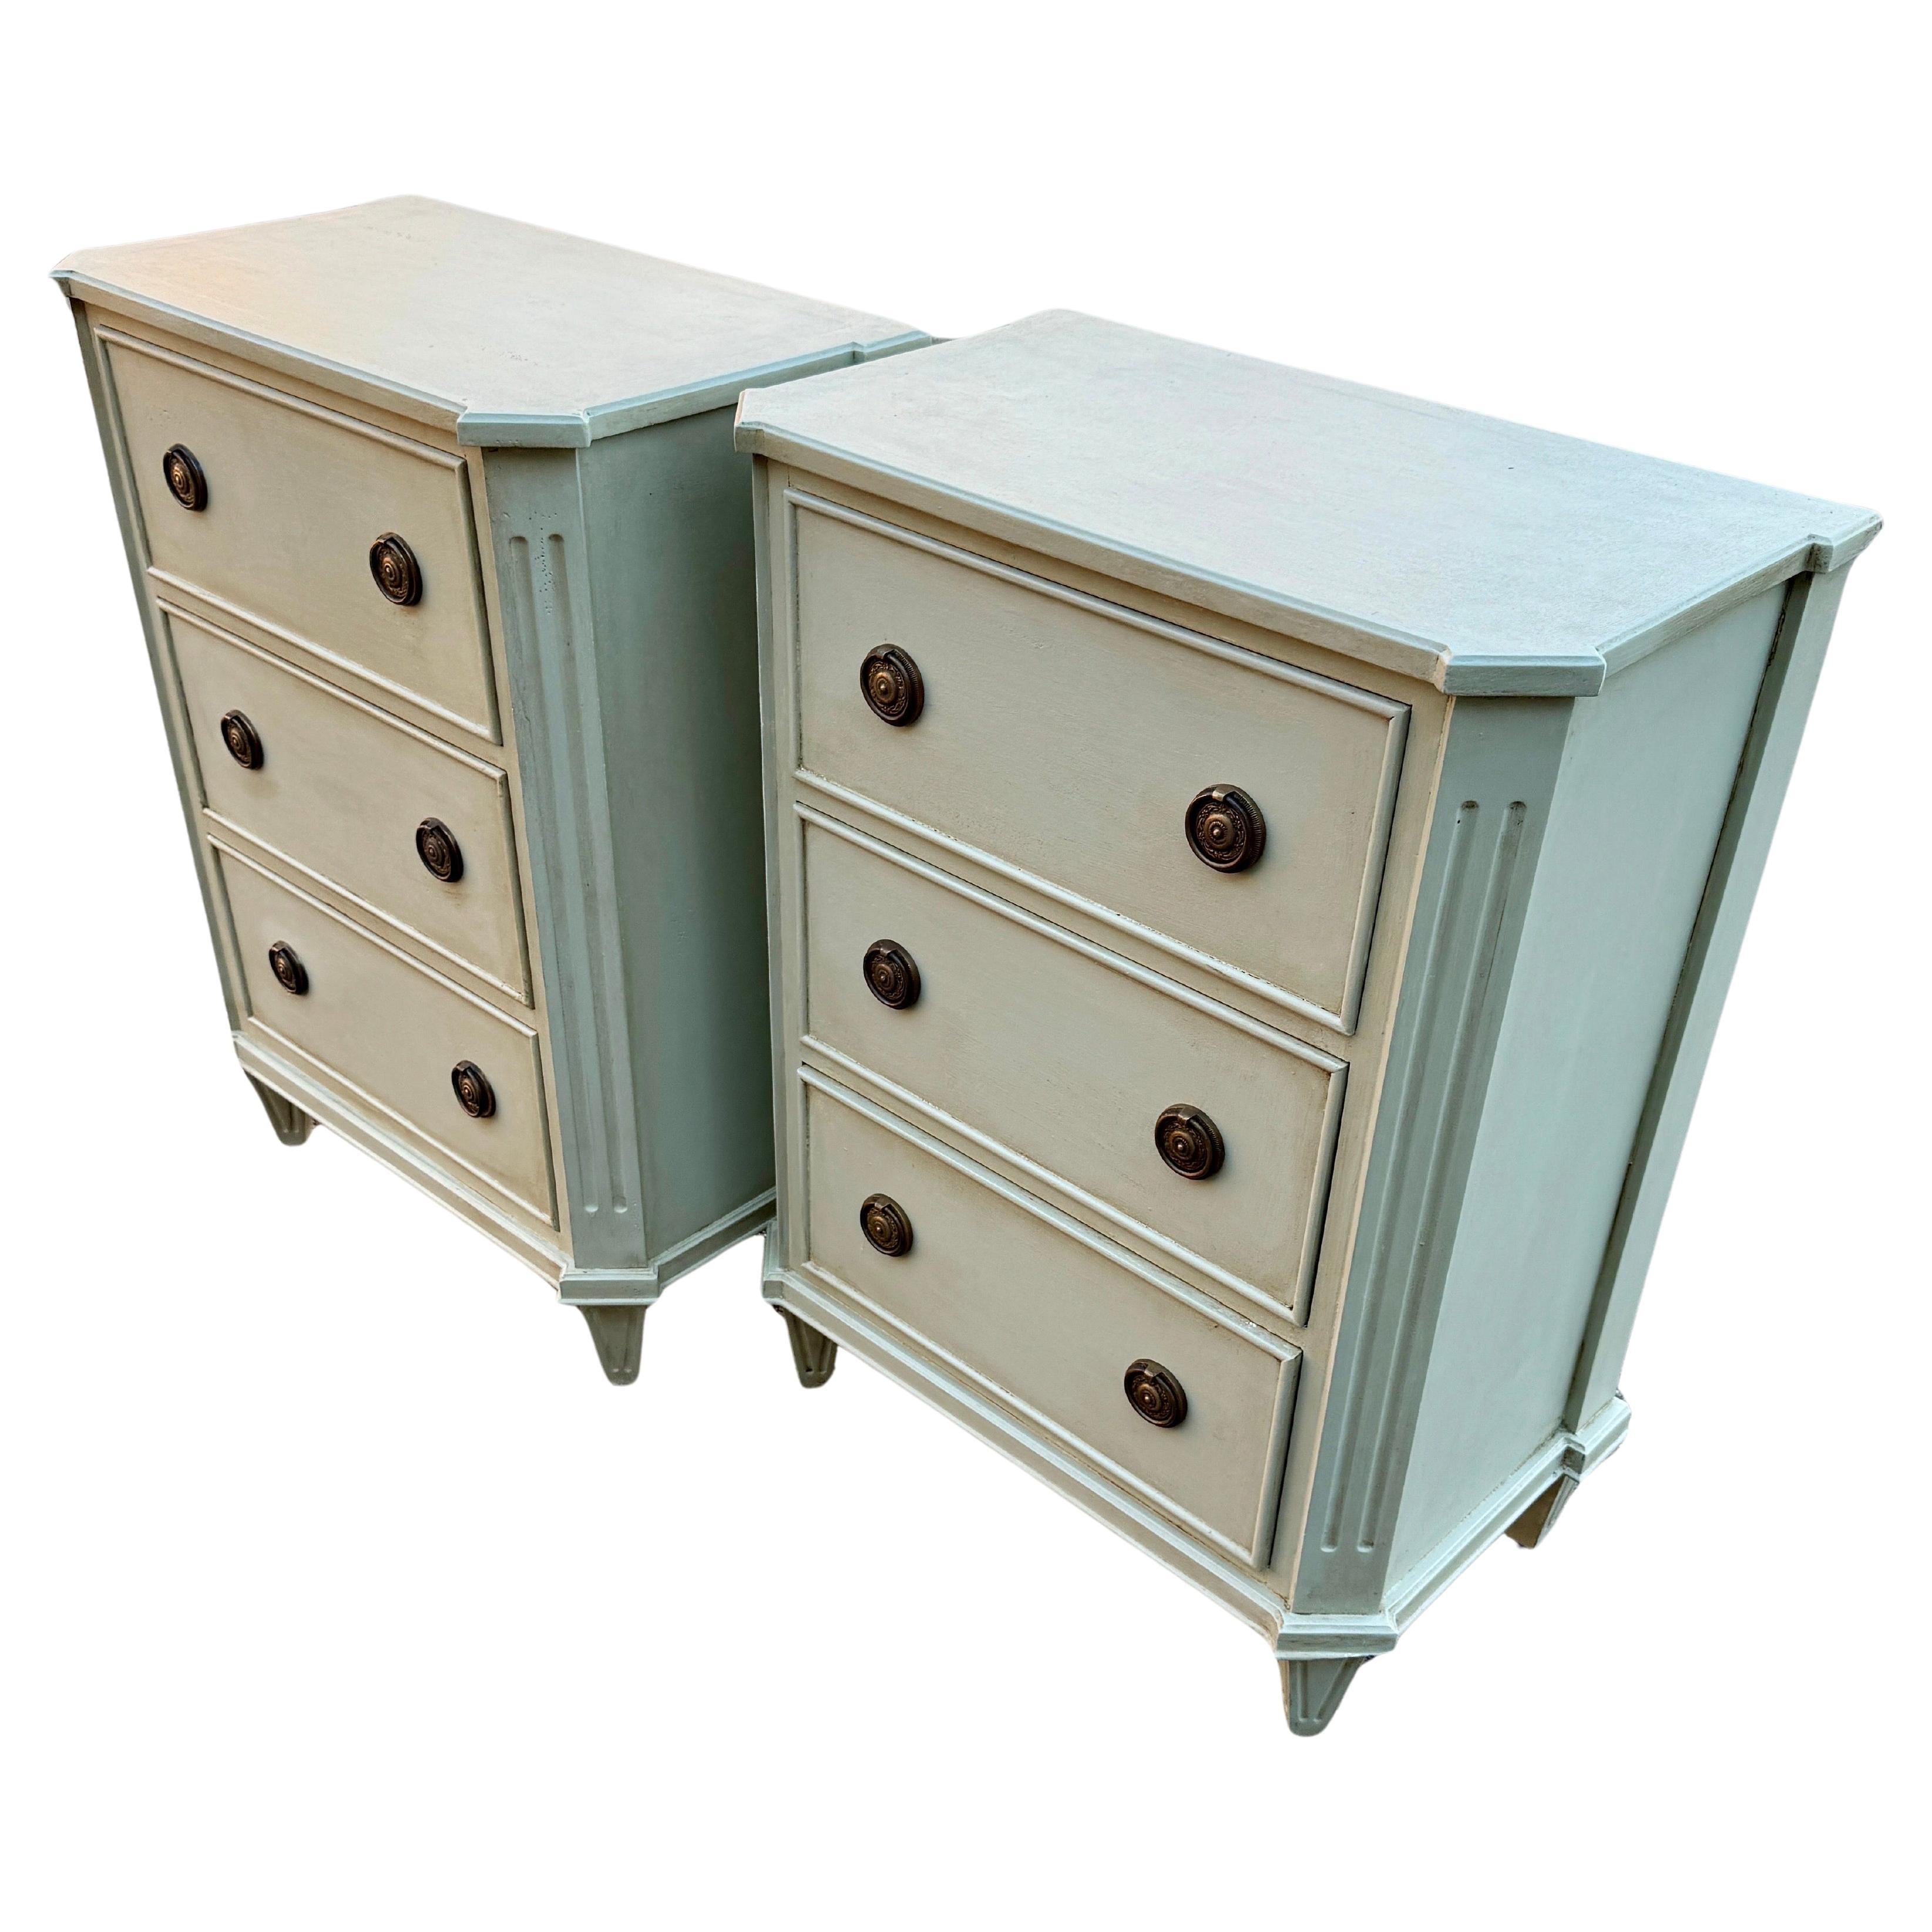 Painted Gustavian Style Chest of Drawers or Side Tables, A Pair 

These classic Swedish style three drawer hand painted chests, small commodes or end tables have been constructed from solid wood with a hand-applied distressed finish and feature